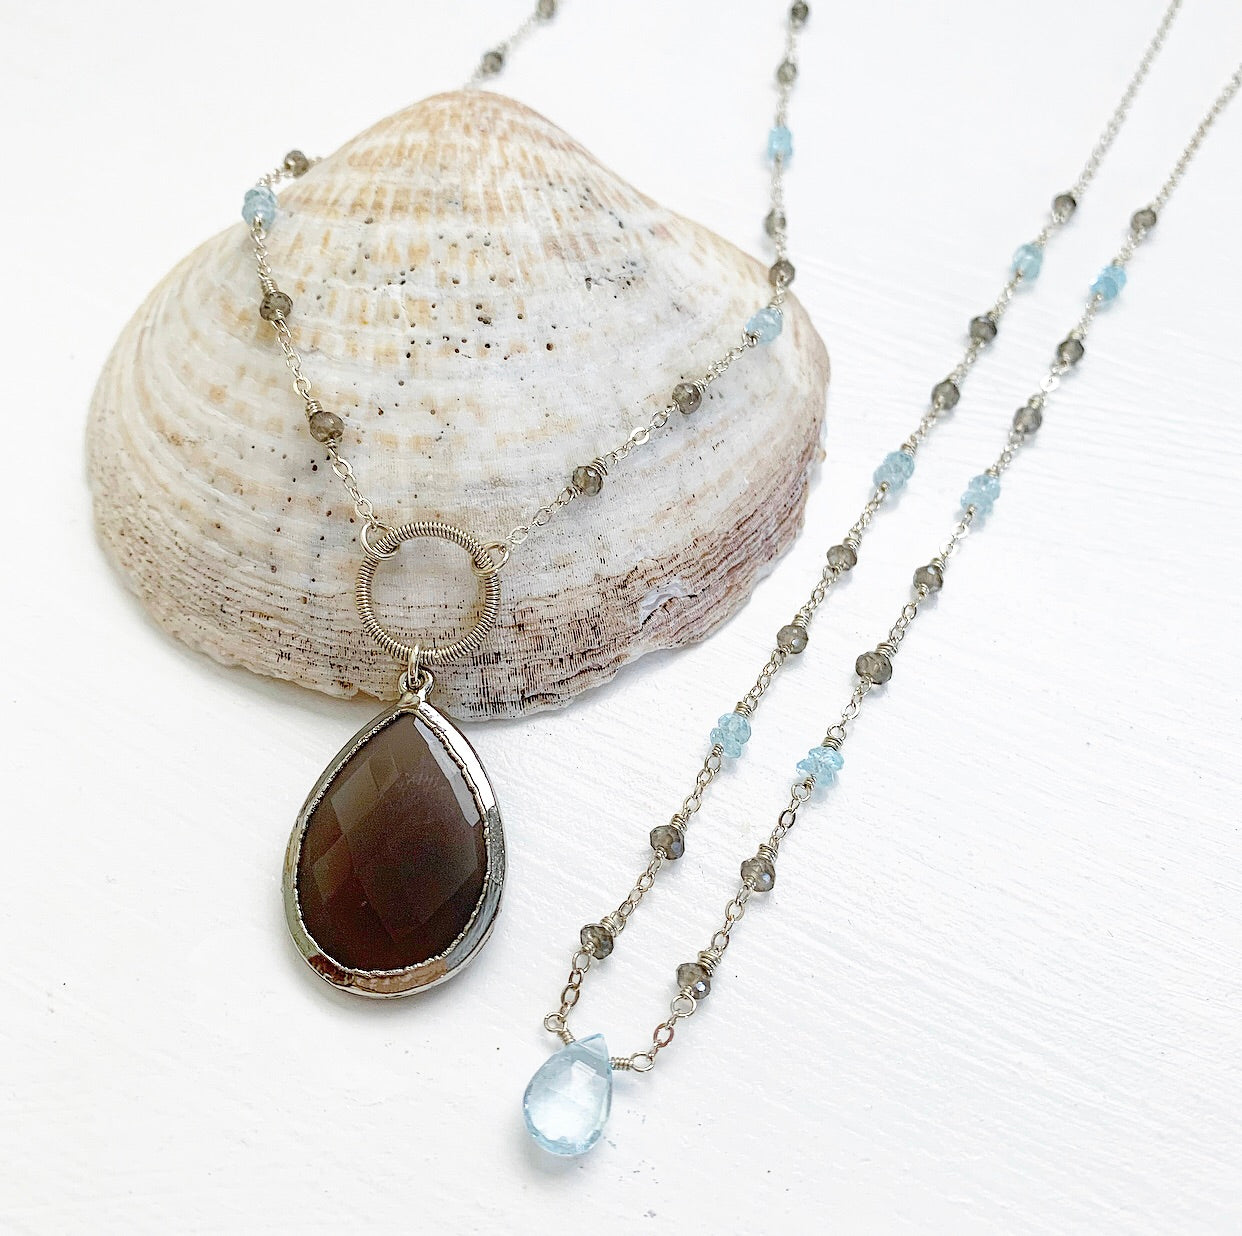 827-One of a Kind Gemstone Necklace